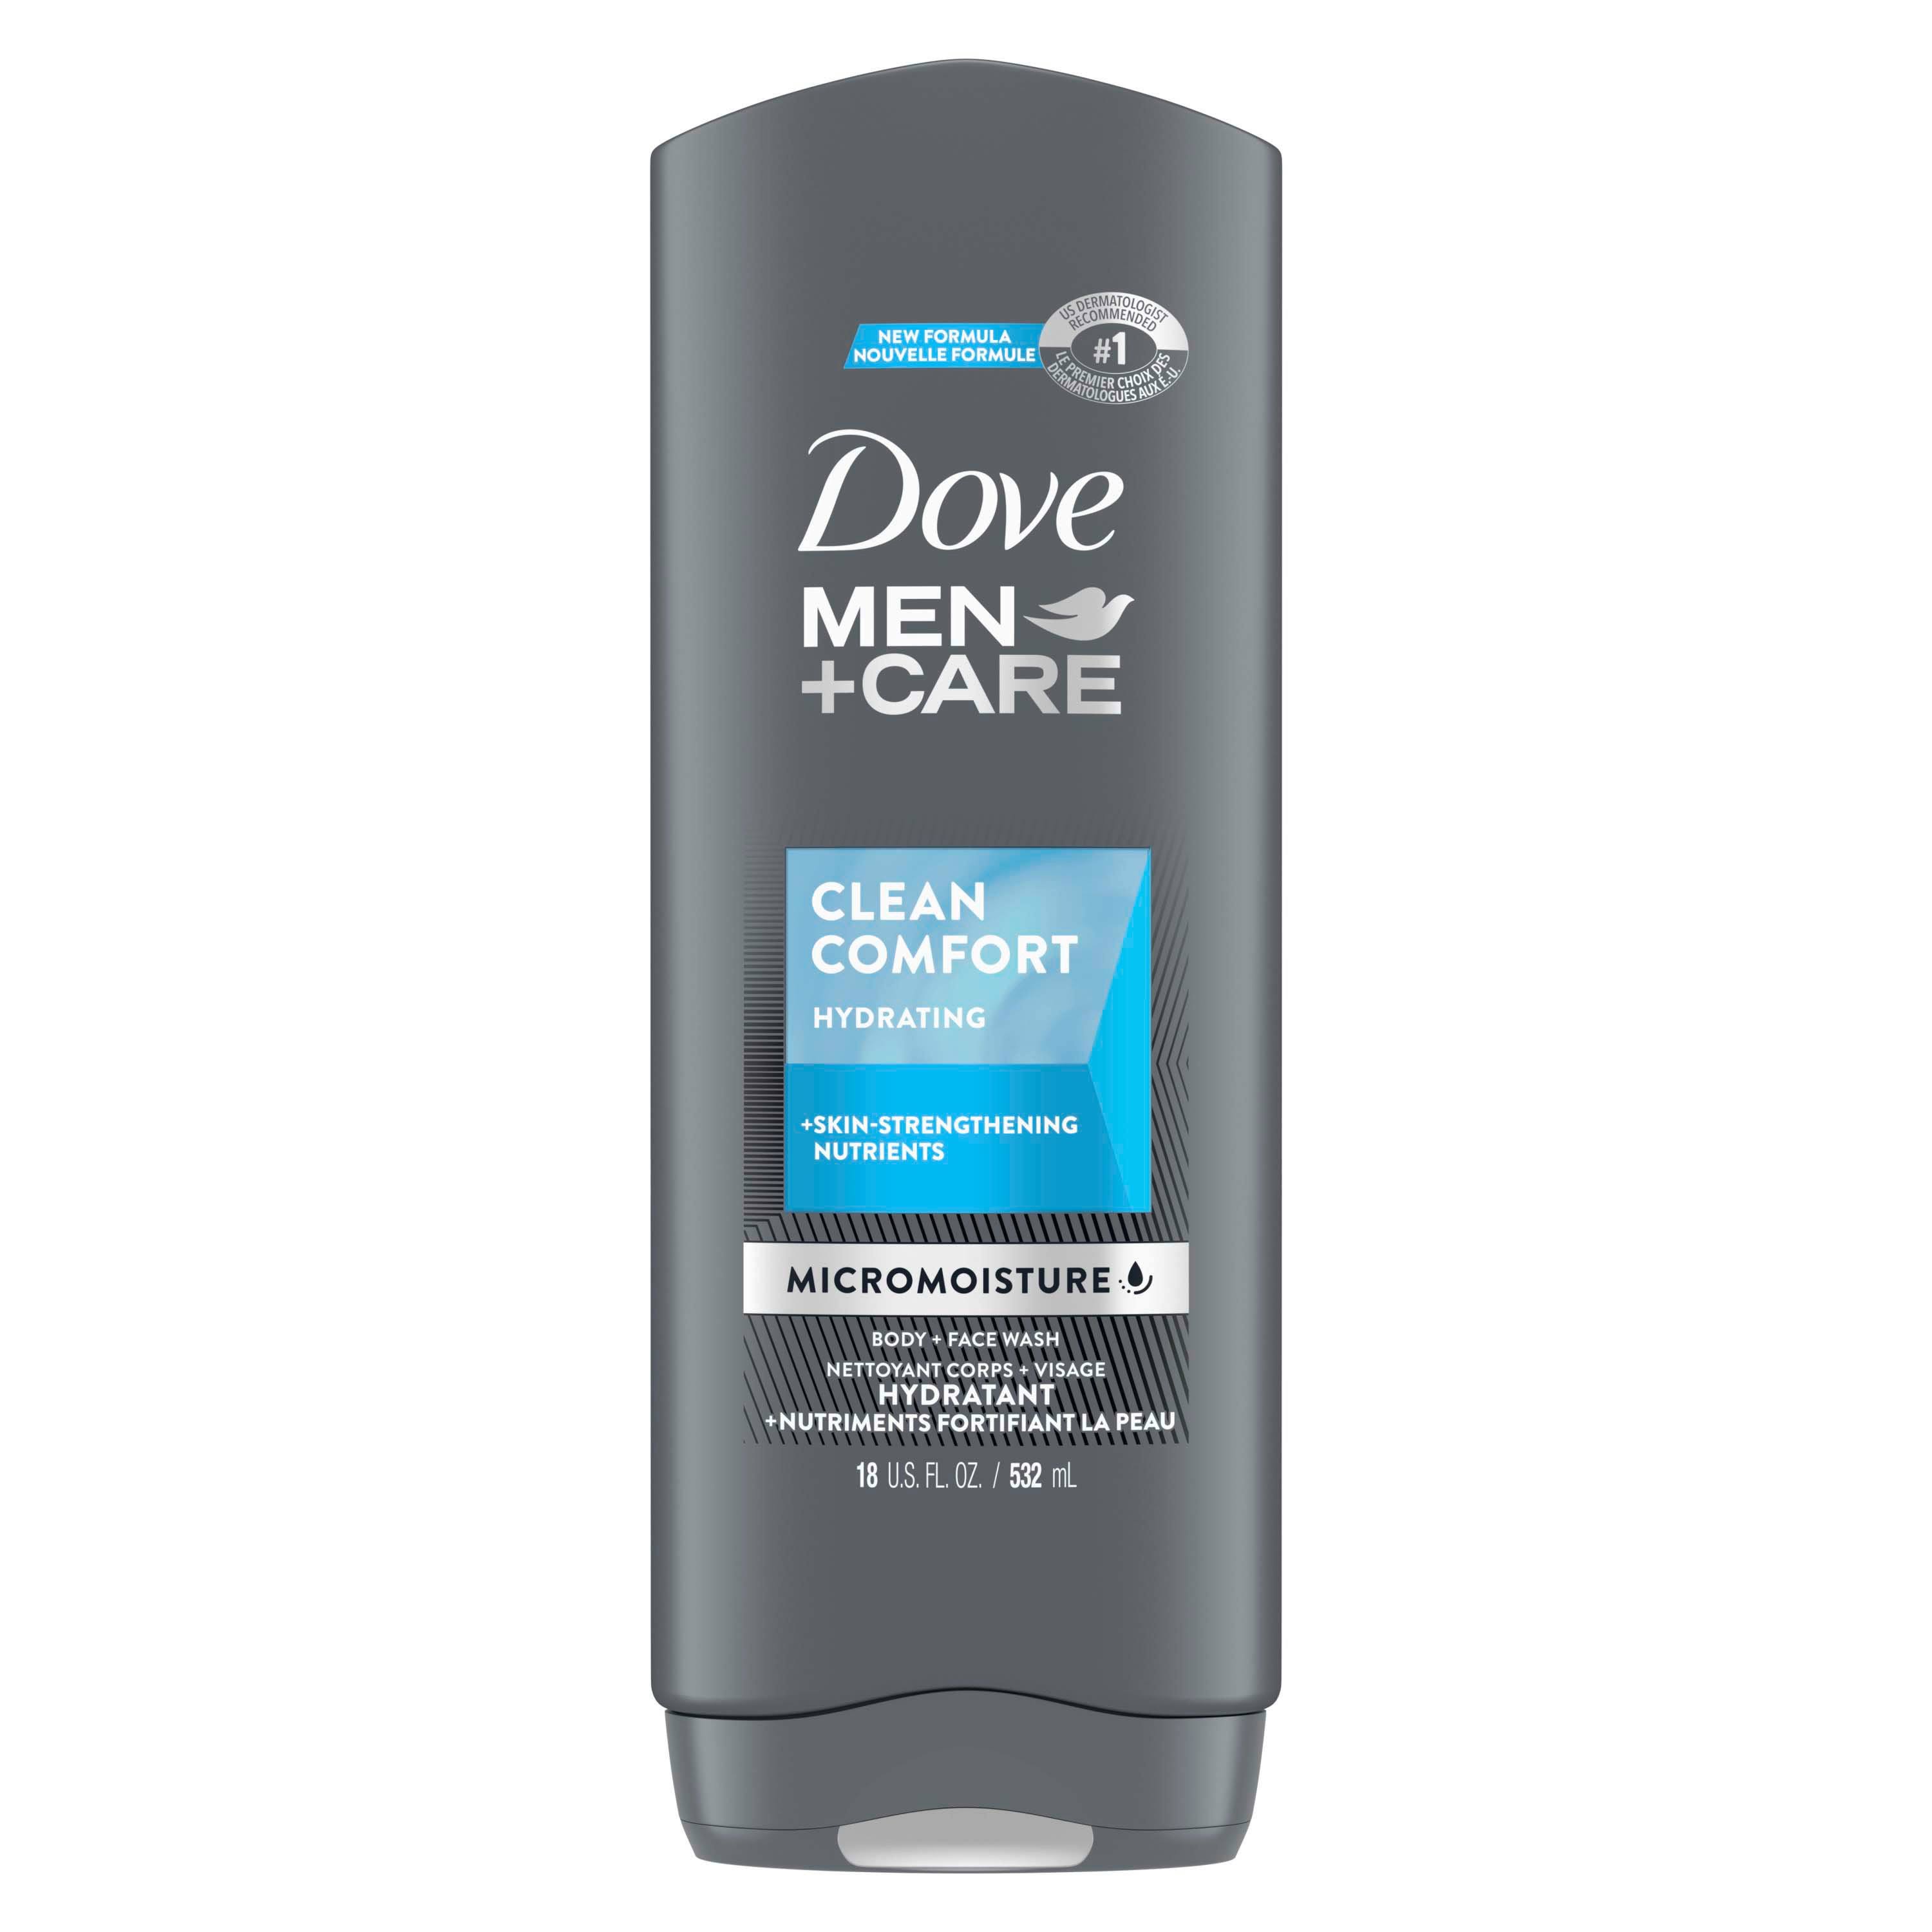 Dove Men and Care Body and Face Wash - Clean Comfort, 18oz